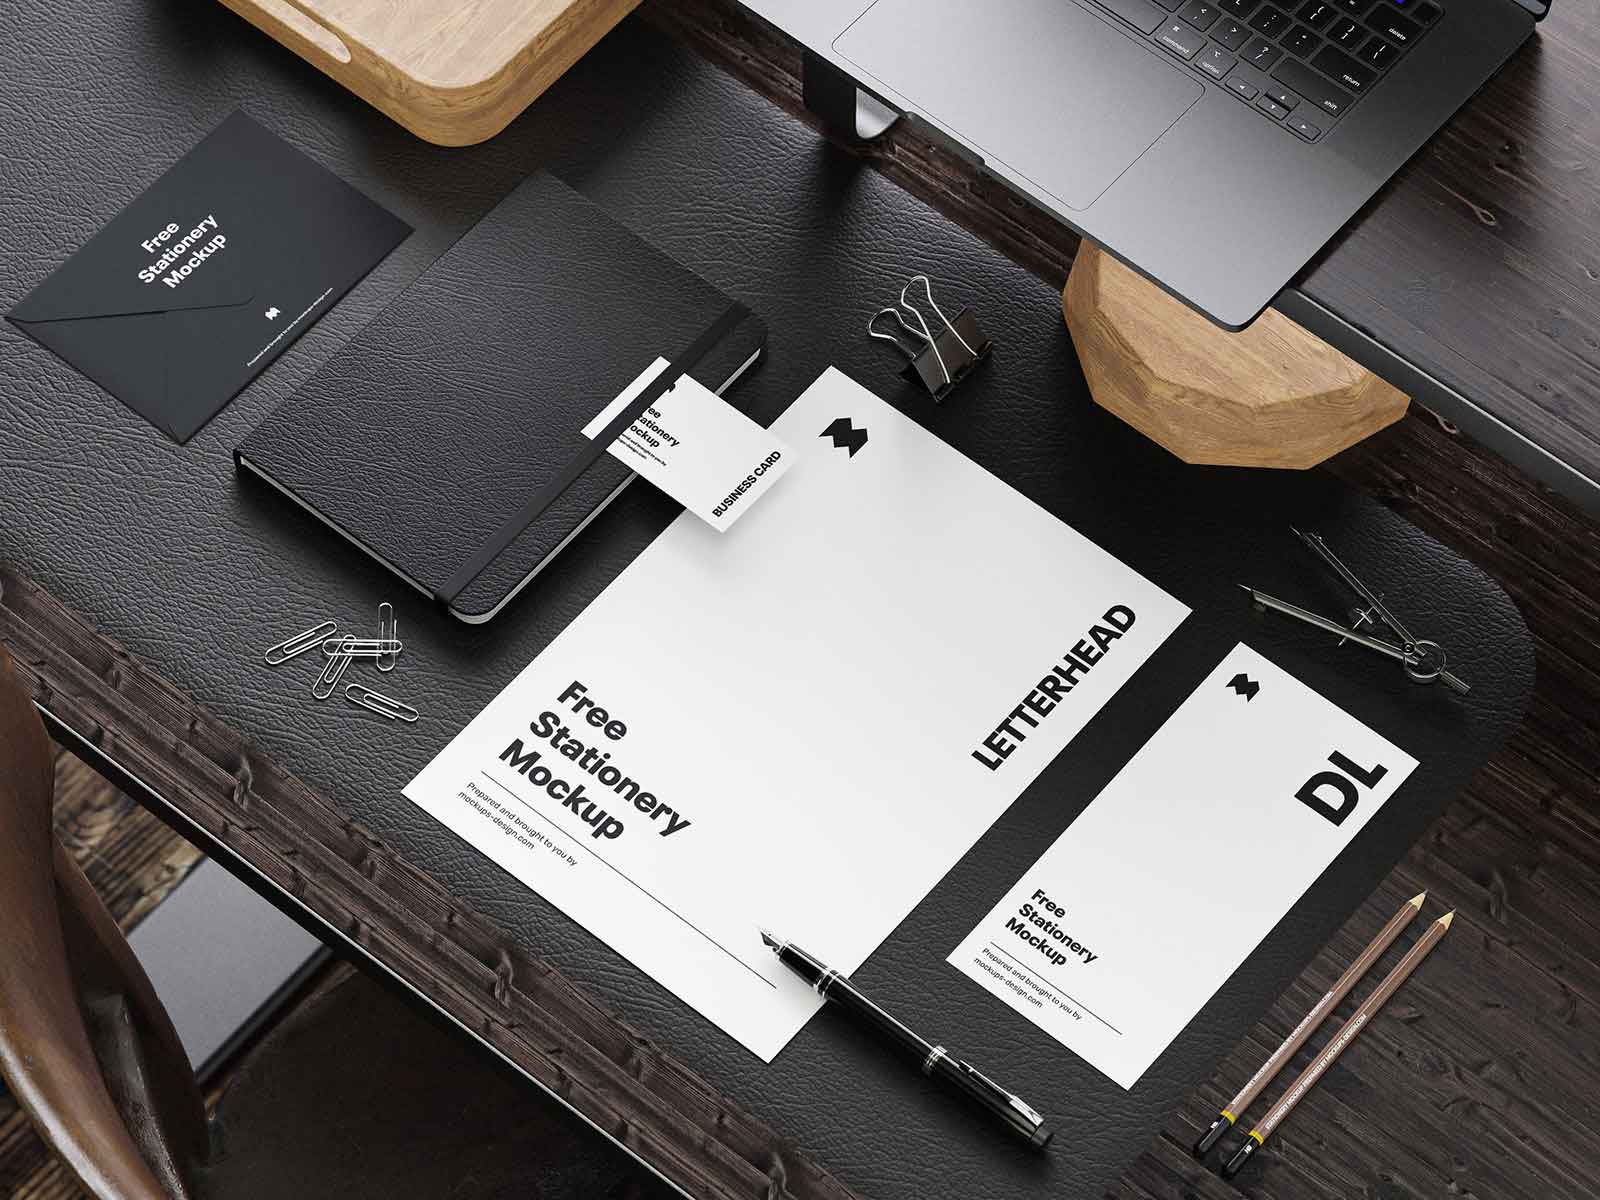 Stationery Mockups in a Workspace Scenes Free PSD